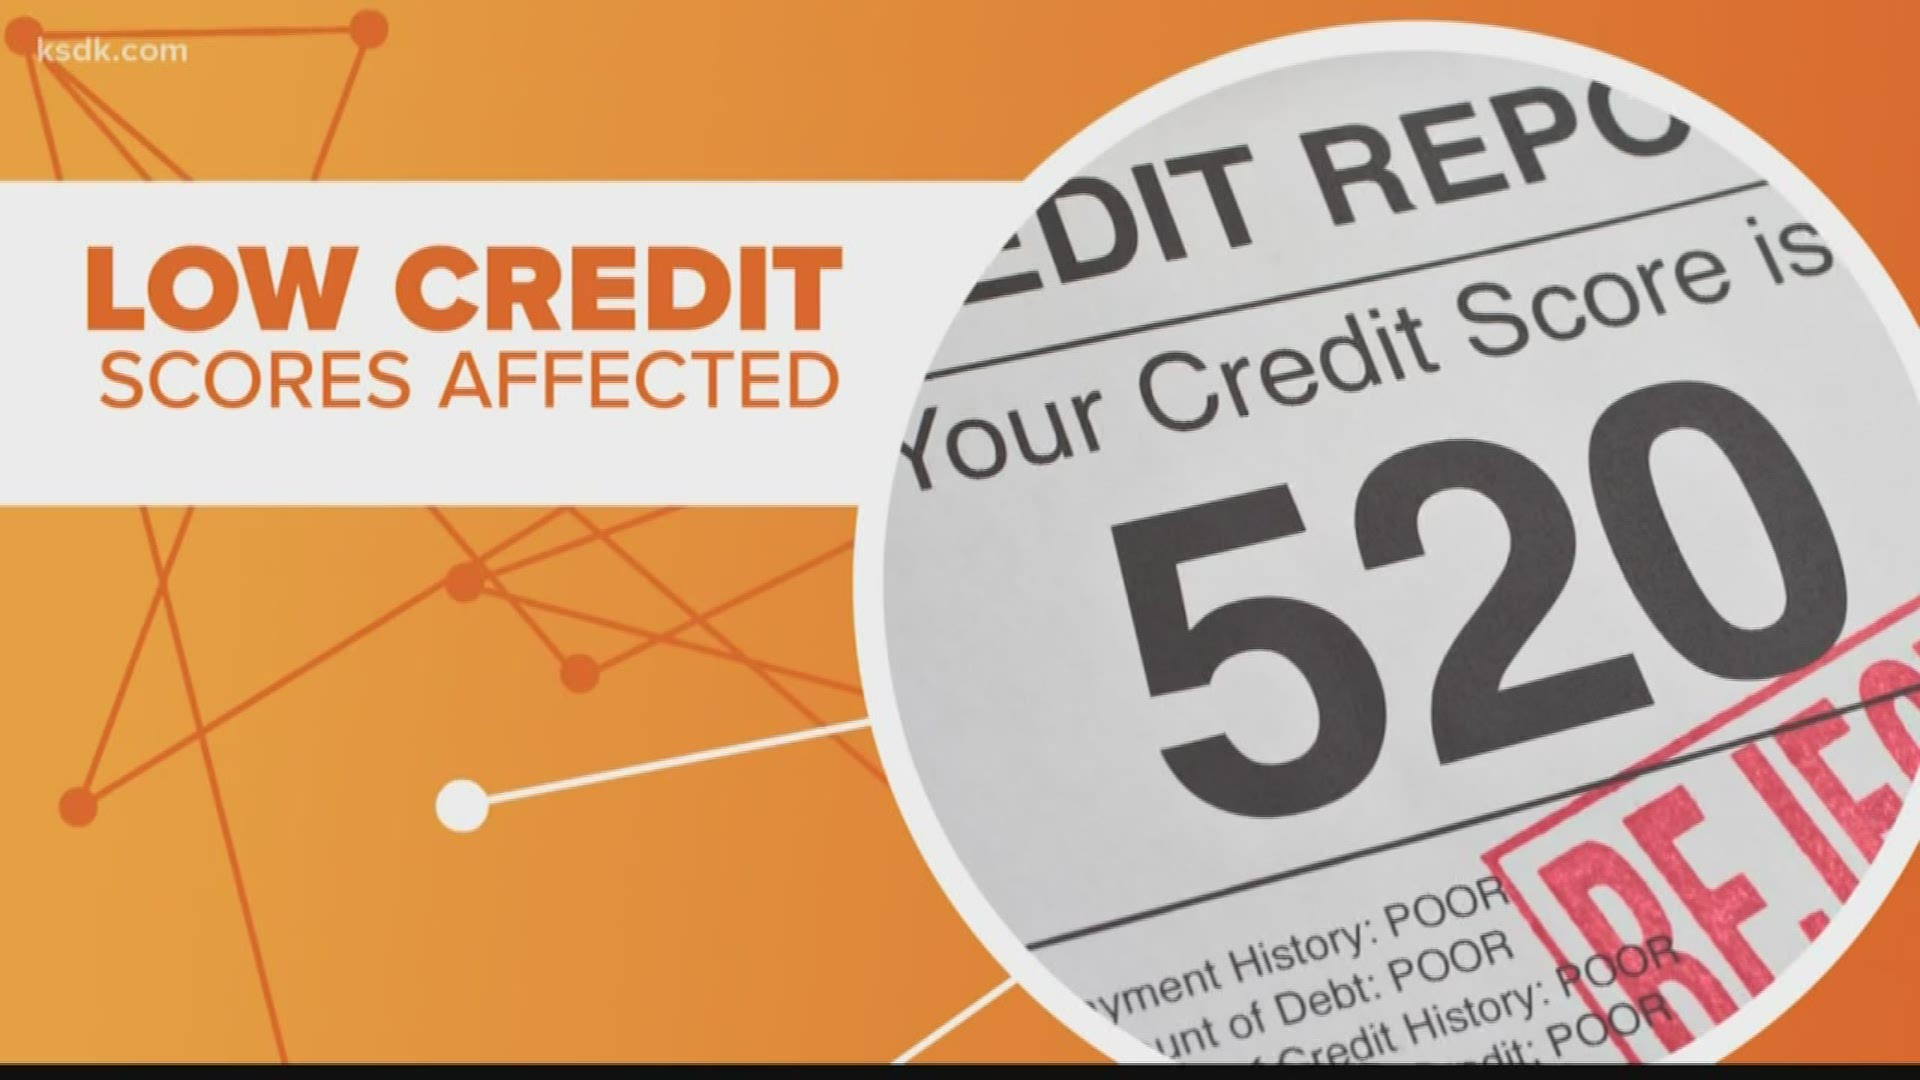 Big changes are coming to credit scores, and that could be bad news for many people.